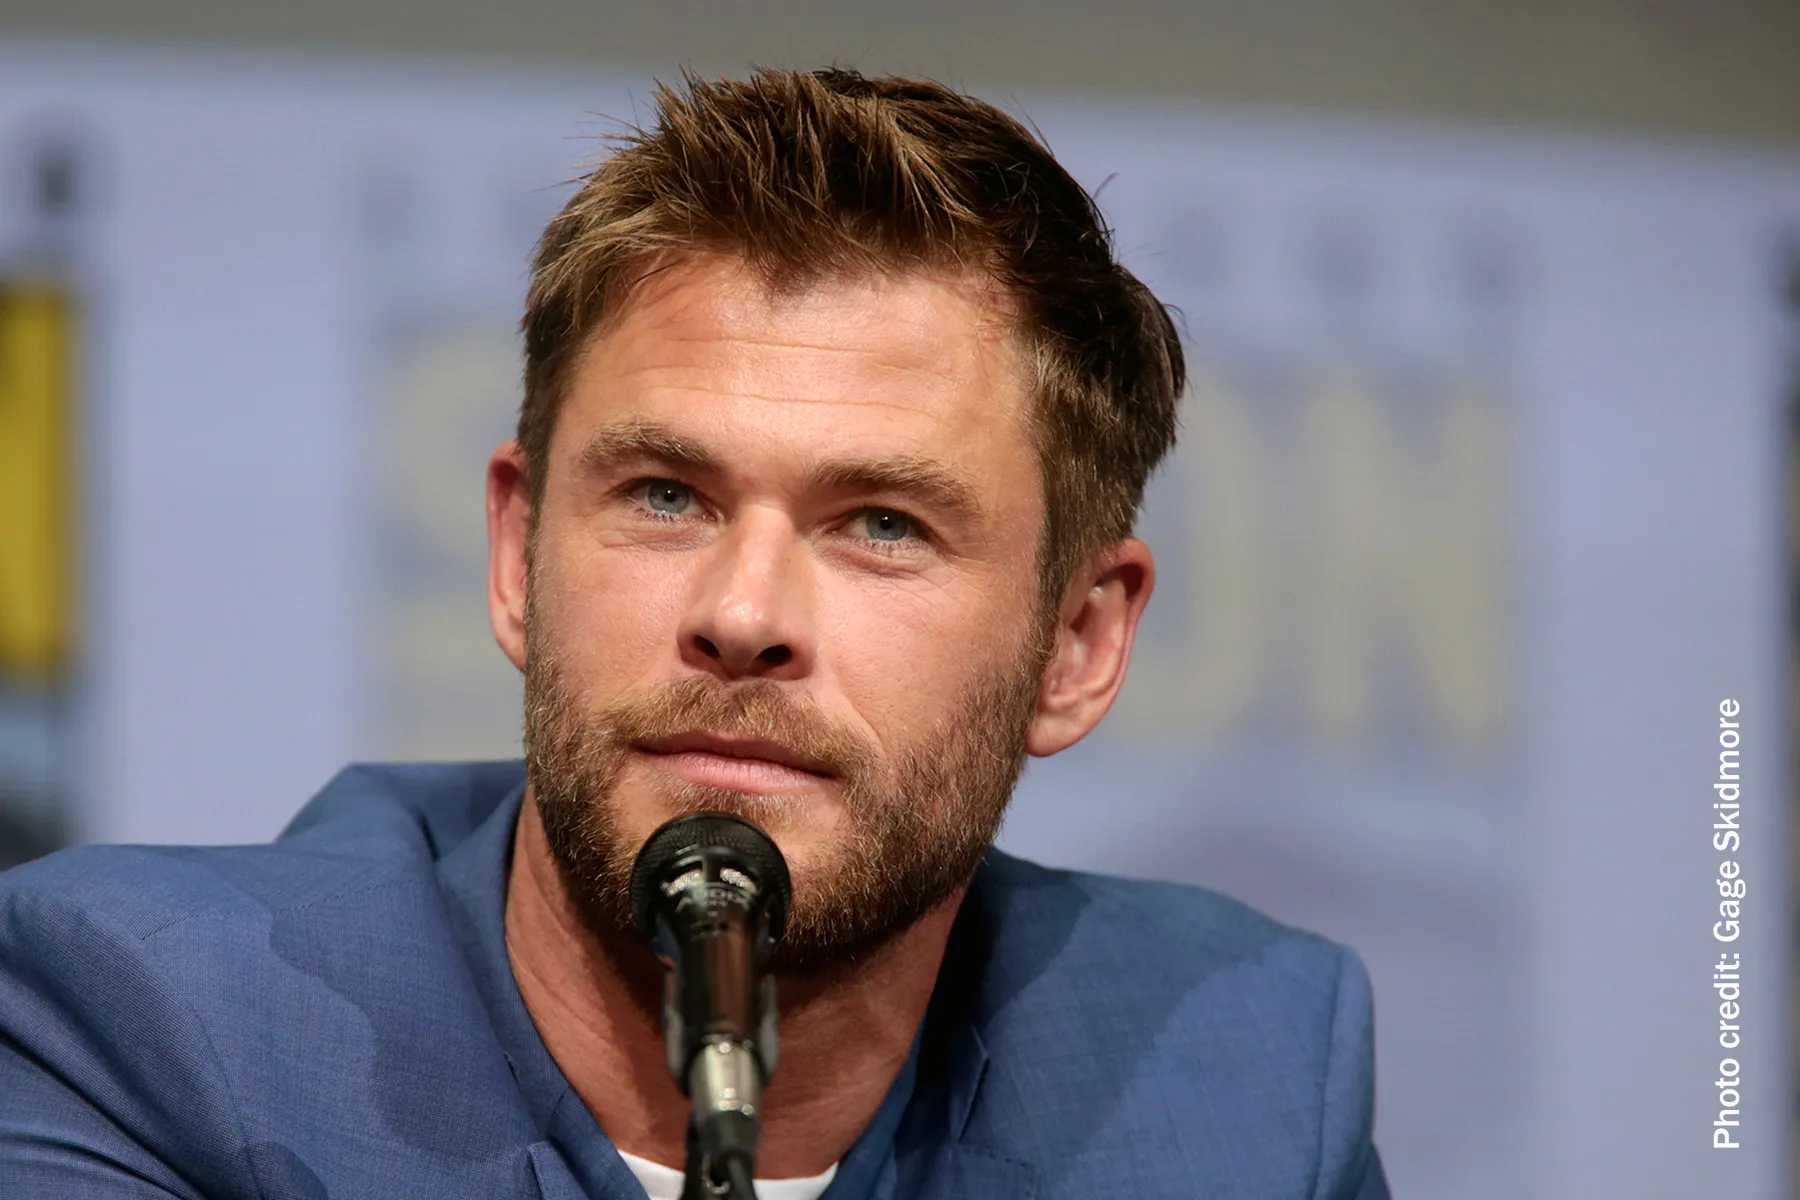 Chris Hemsworth’s Alzheimer’s Be anxious: What to Know About APOE4 Gene thumbnail